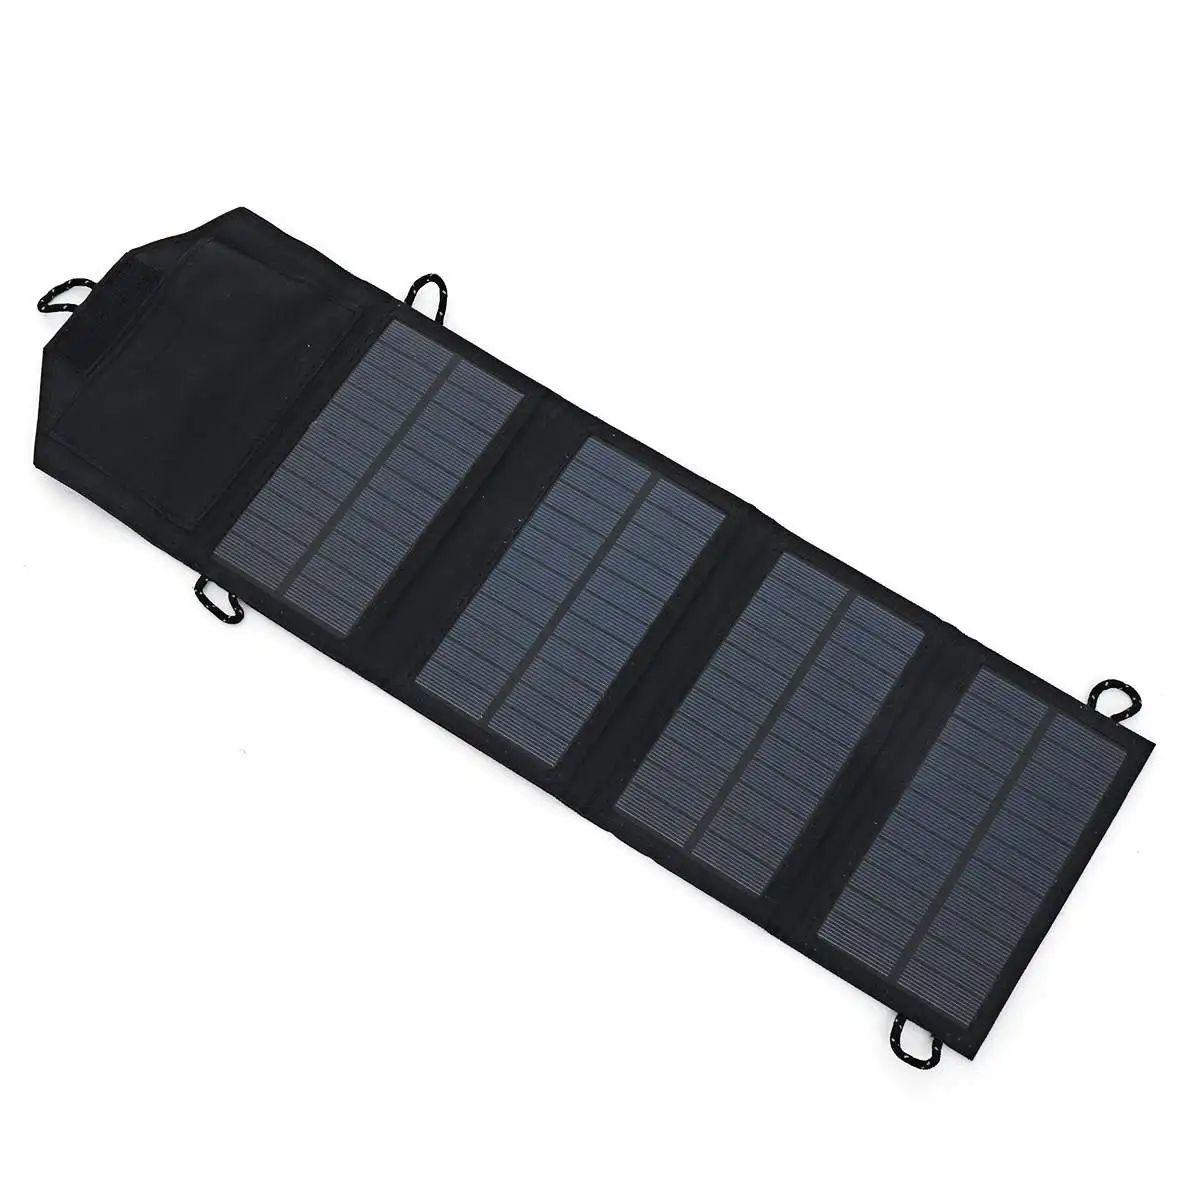 80w foldable solar panel solar kit complete cell power bank solar plate for hiking camping outdoor mobile power battery charger free global shipping